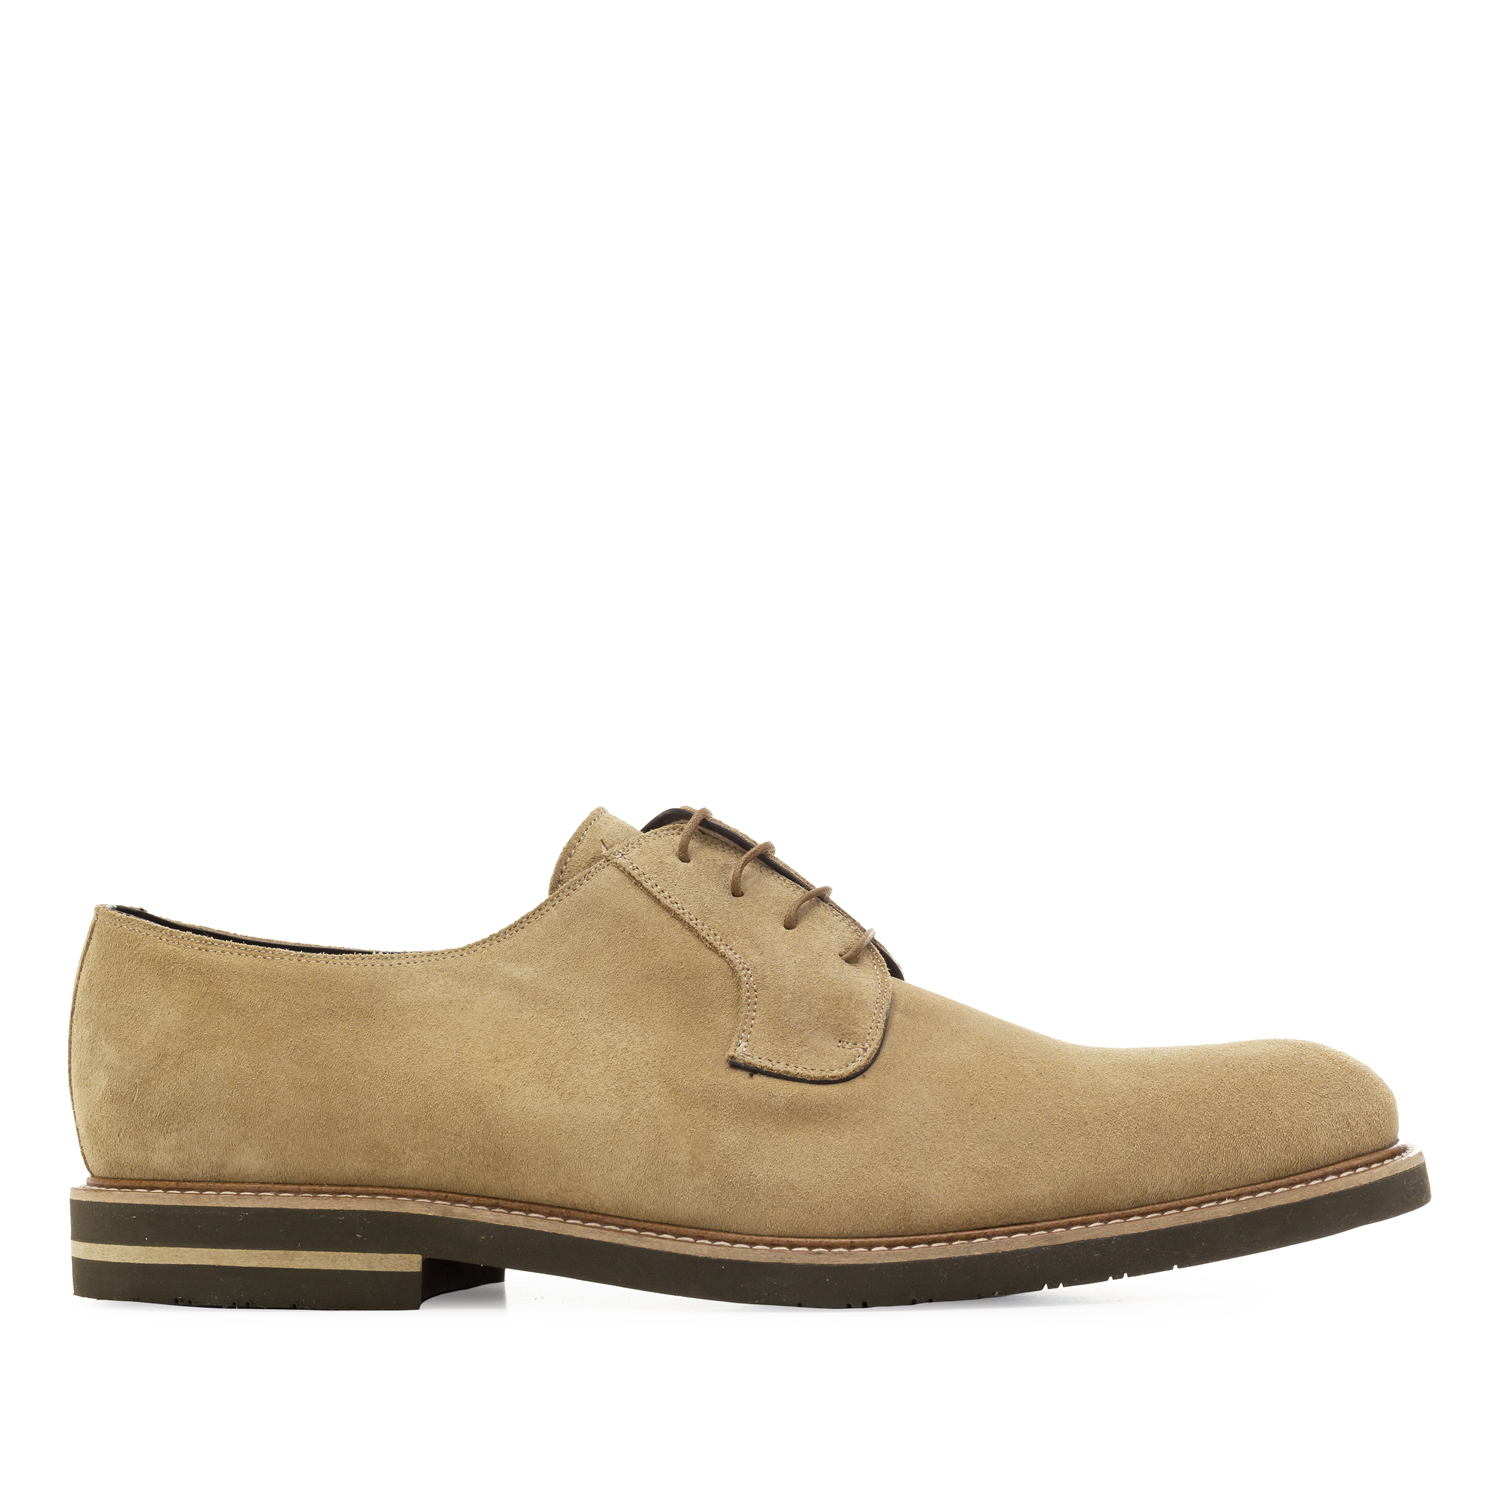 Oxford Shoes in Sand-coloured Split Leather 